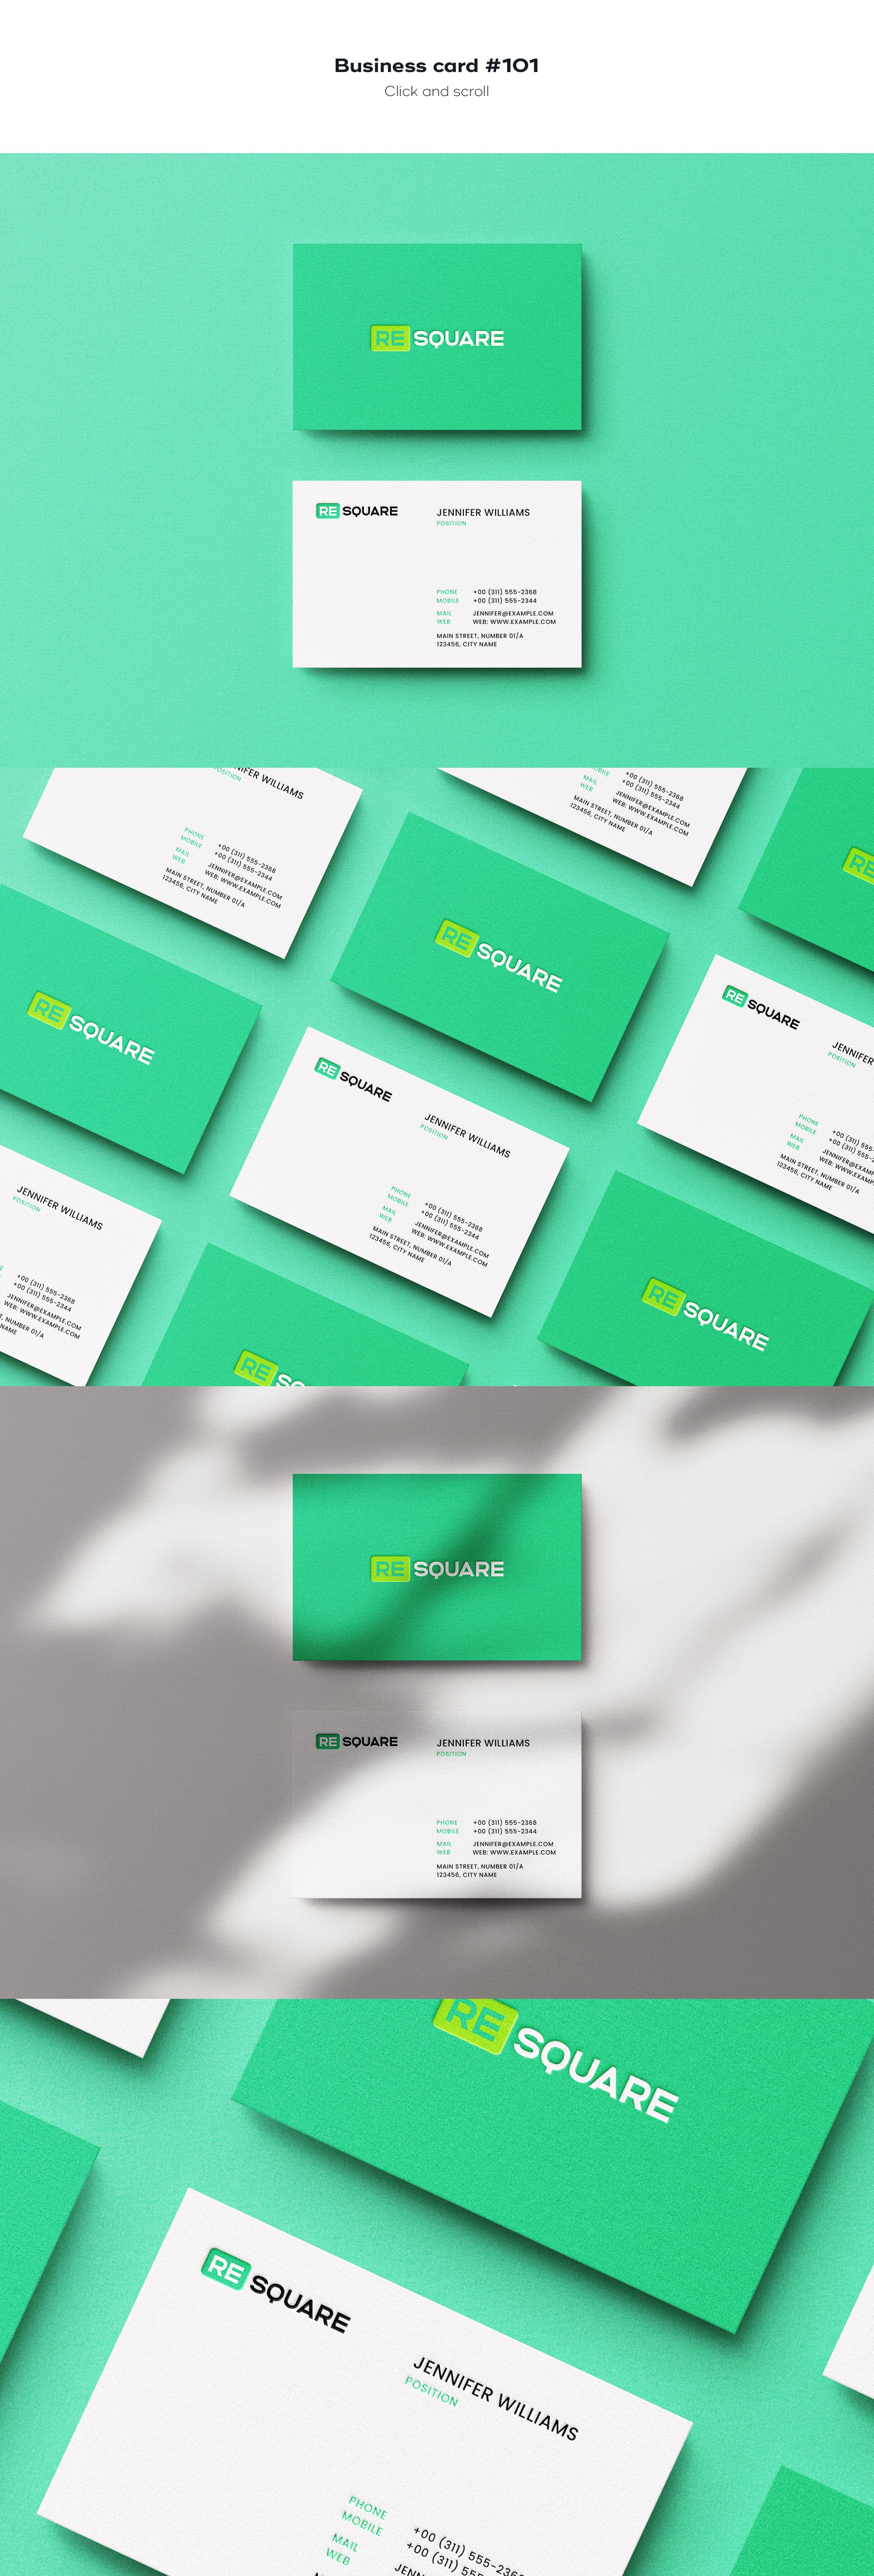 business card 101 228